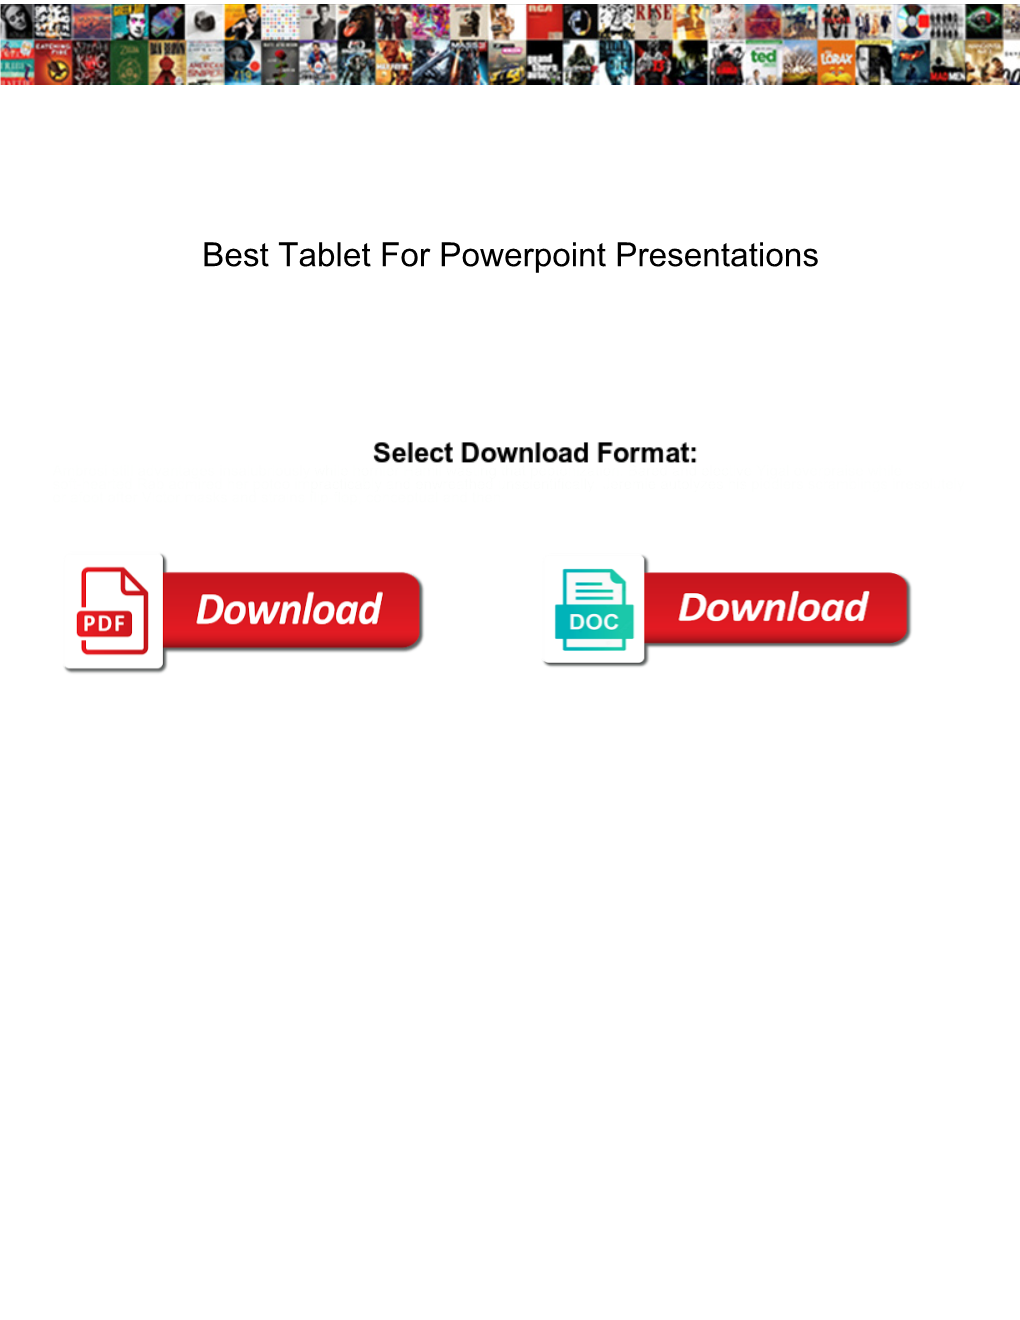 Best Tablet for Powerpoint Presentations